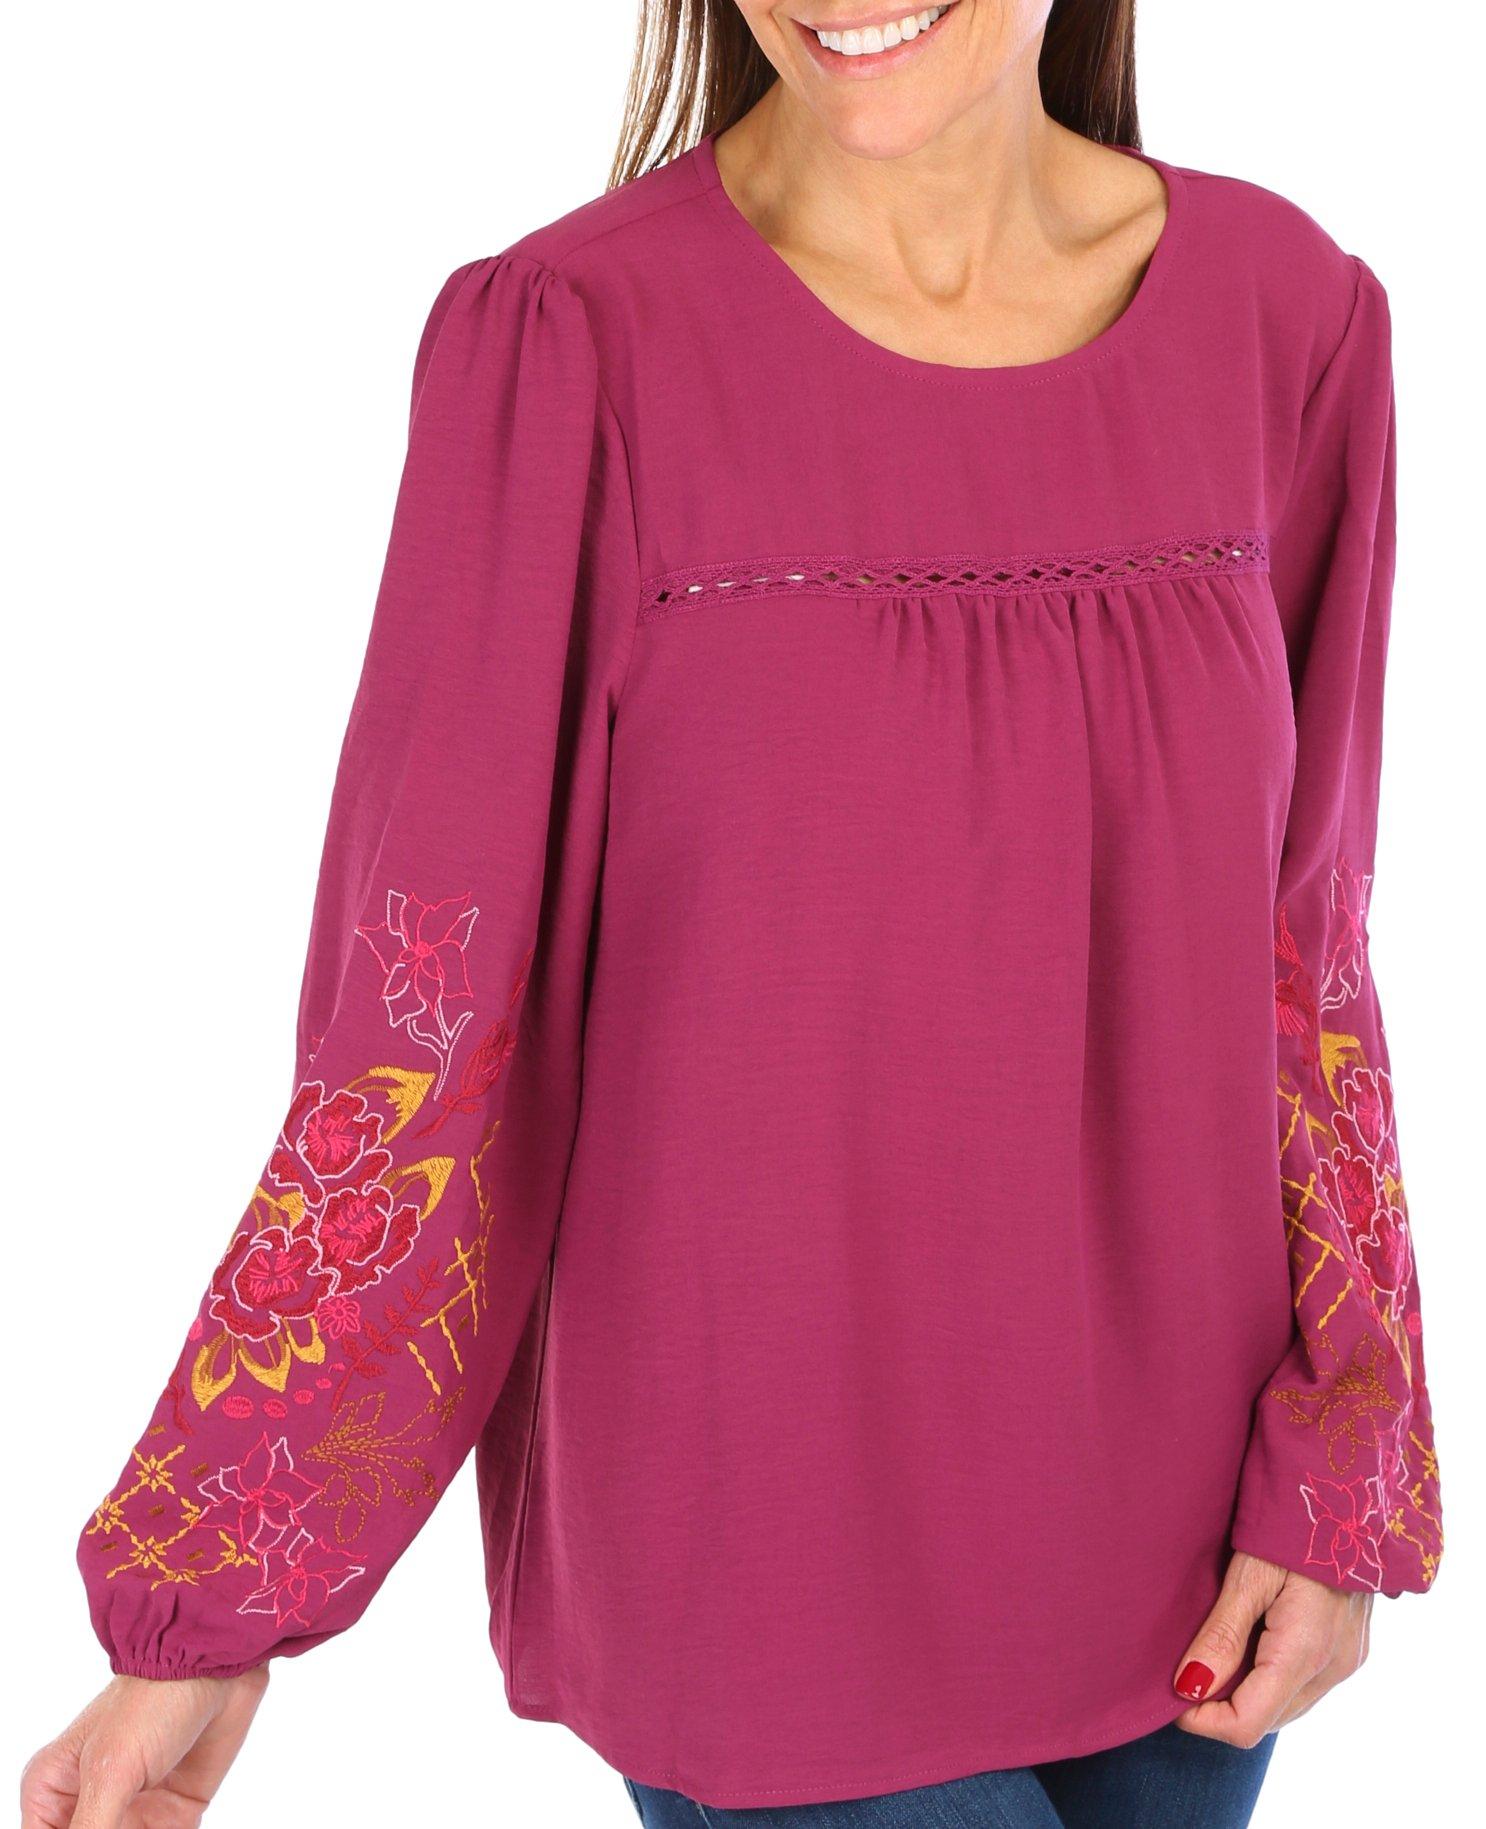 Figuero & Flower Womens Embroidered 3/4 Sleeve Top